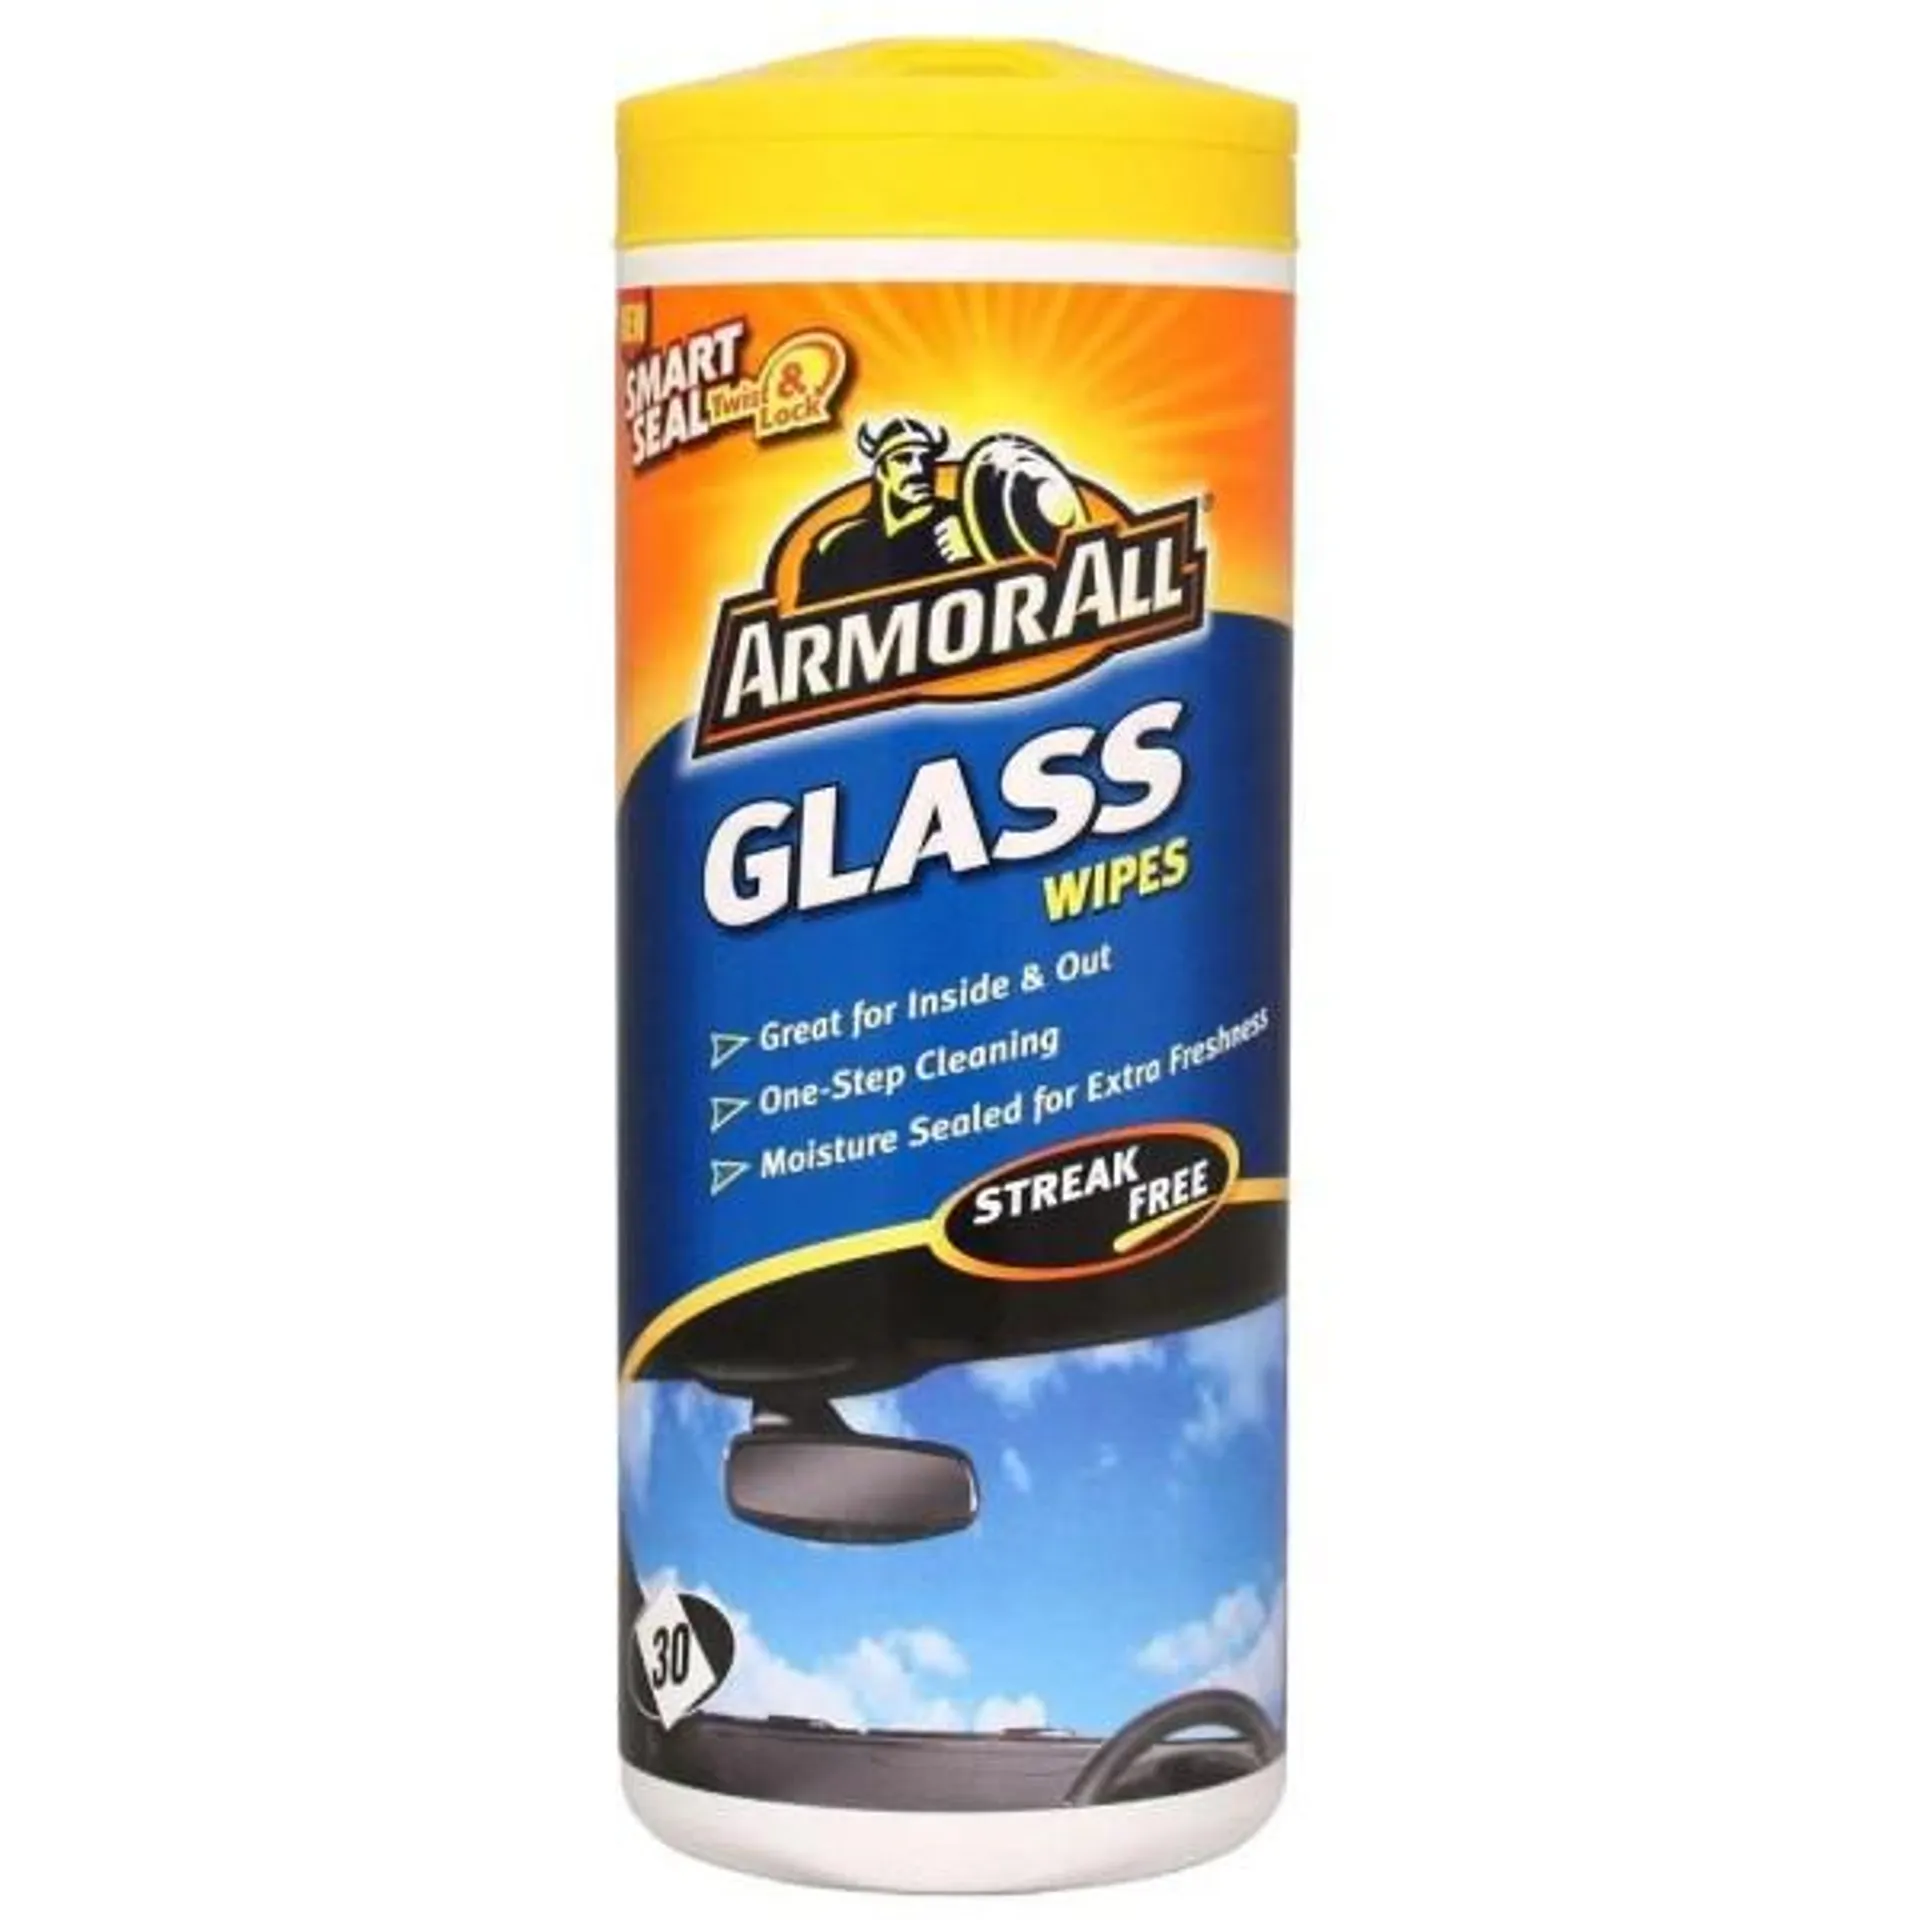 Armor All Glass Wipes x 30